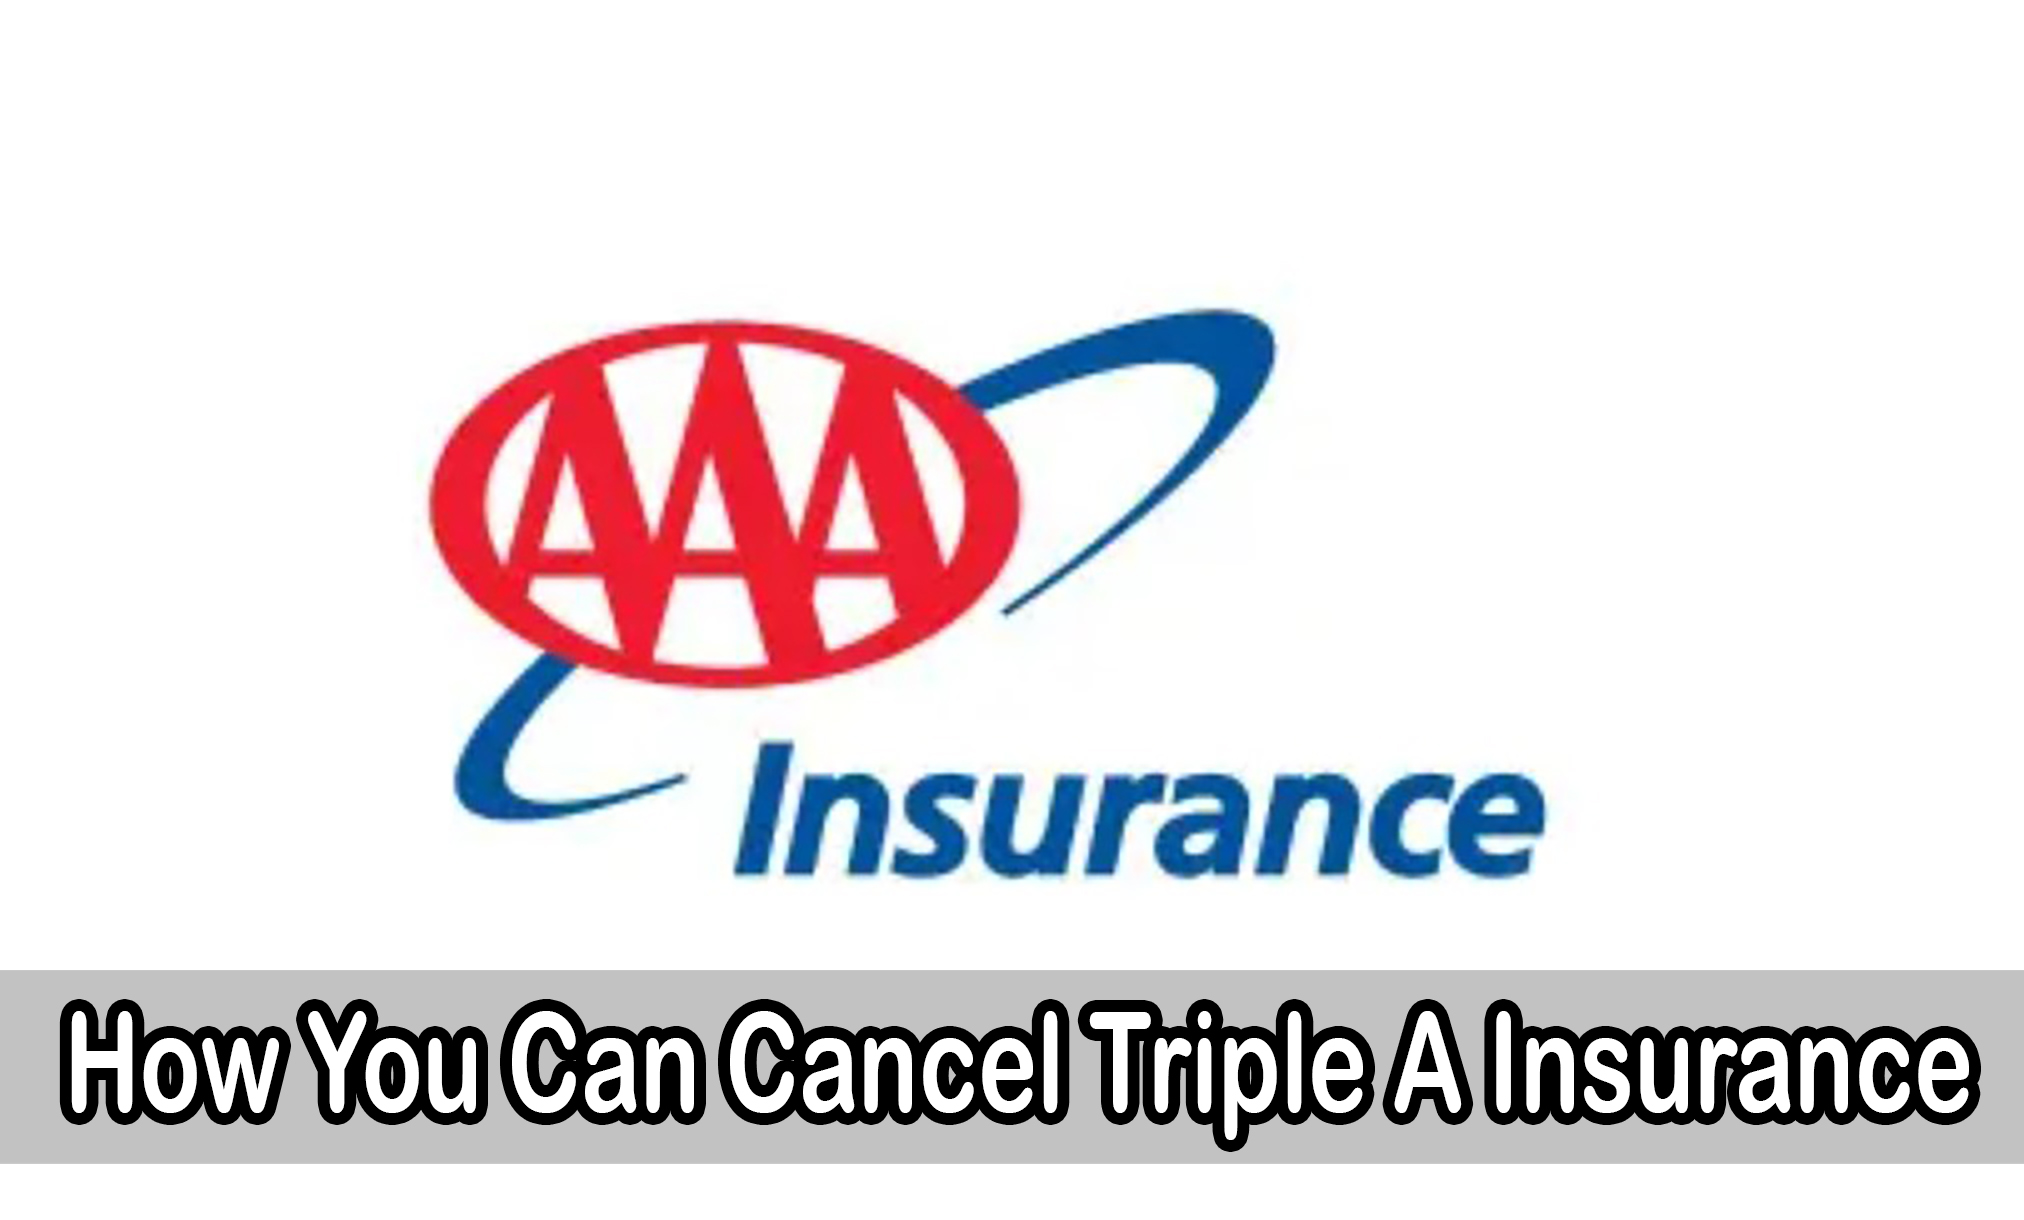 How You Can Cancel Triple A Insurance